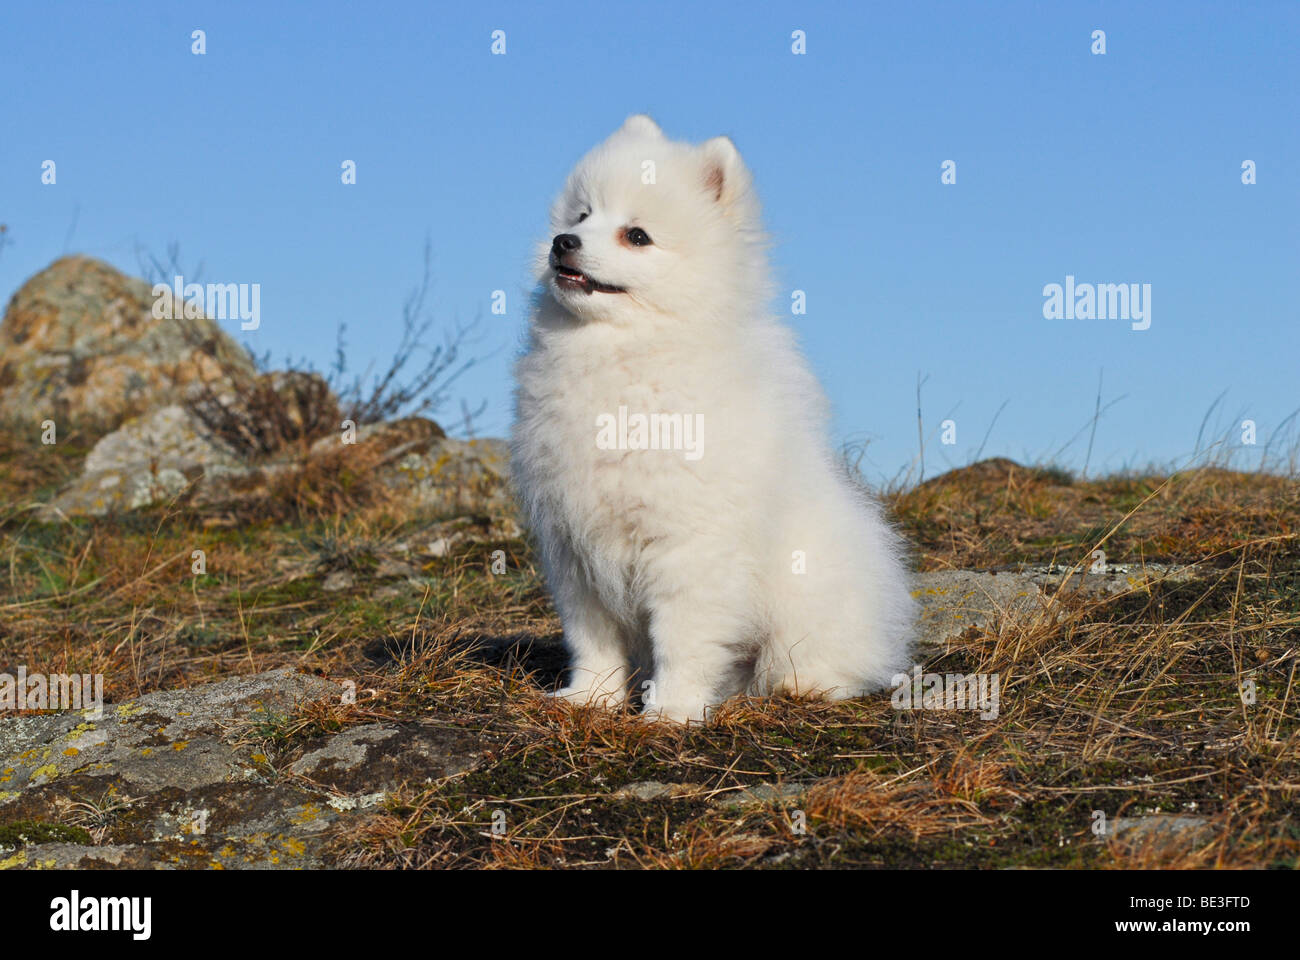 Japanese Spitz or Nihon Supittsu sitting on a rocky plateau Stock Photo